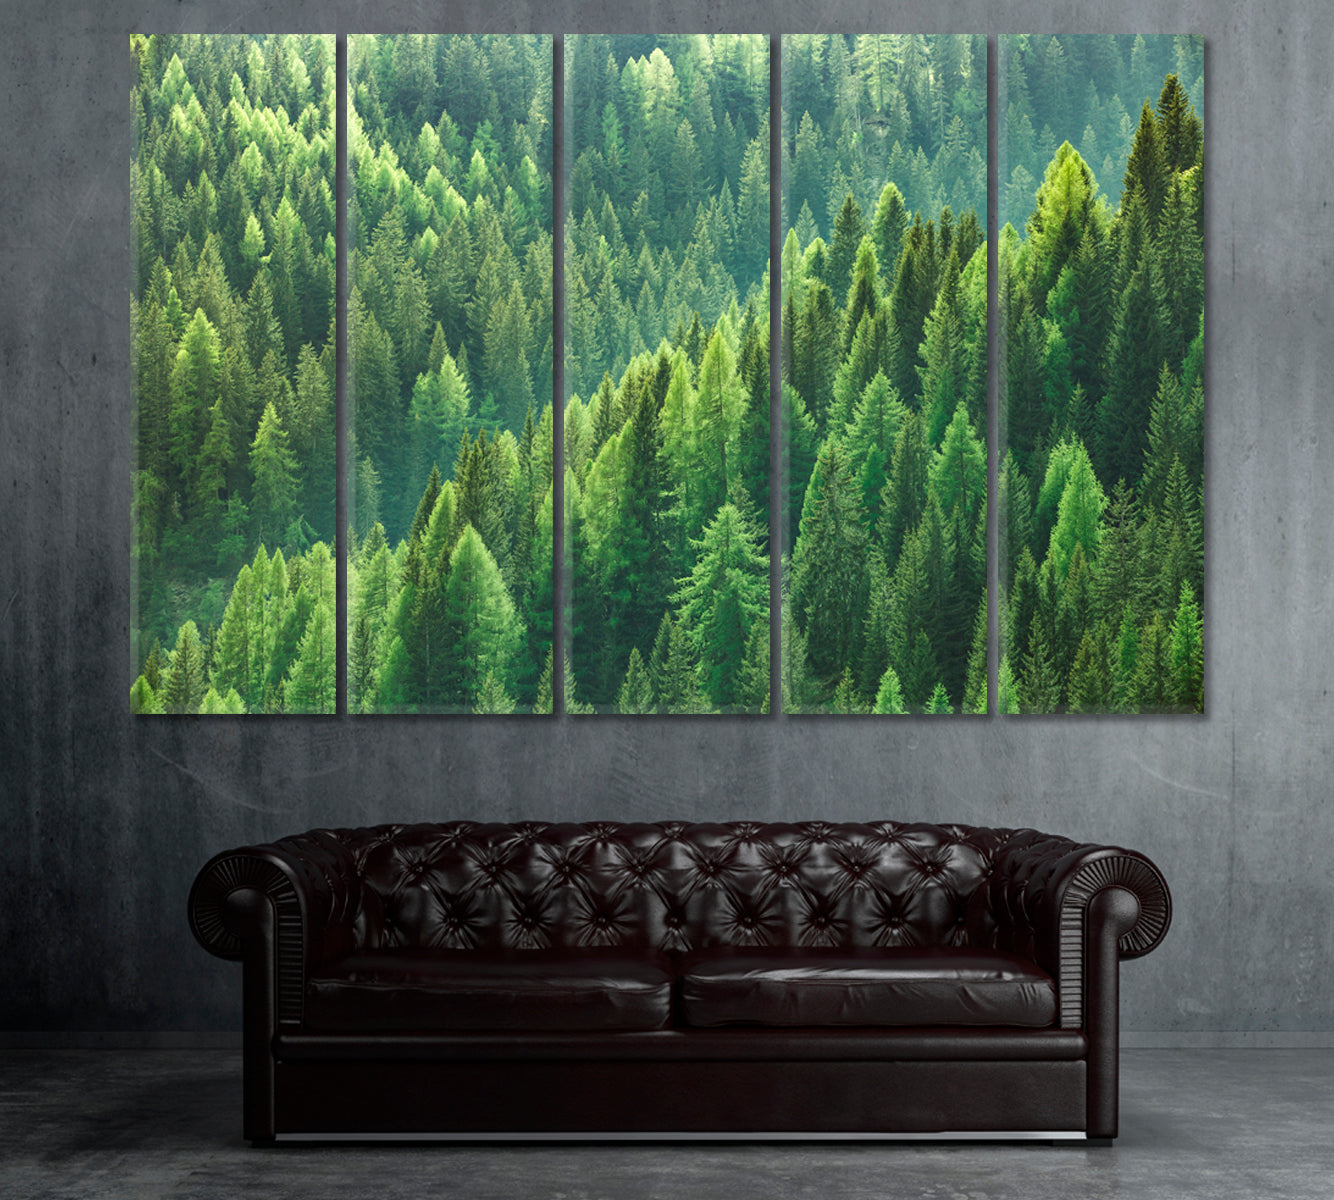 Green Forest of Fir and Pine Trees Canvas Print ArtLexy 5 Panels 36"x24" inches 